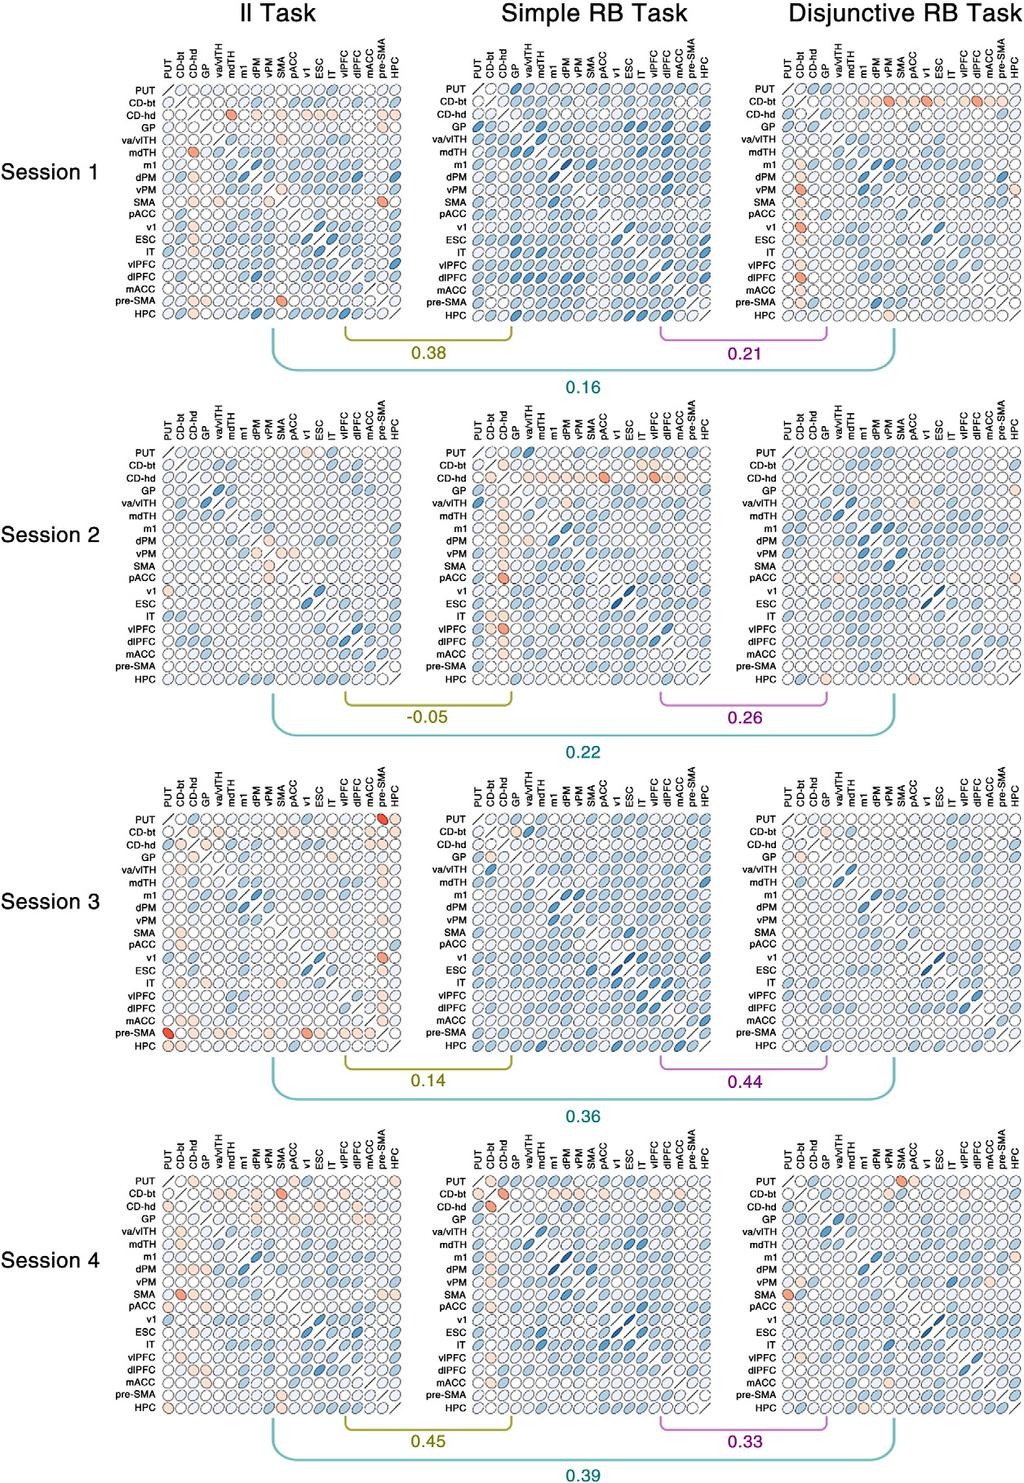 10 F.A. Soto et al. / NeuroImage 71 (2013) xxx xxx Fig. 5. Matrices of correlations between ROIs obtained in the classiﬁcation similarity analysis and their pairwise correlations within each session.